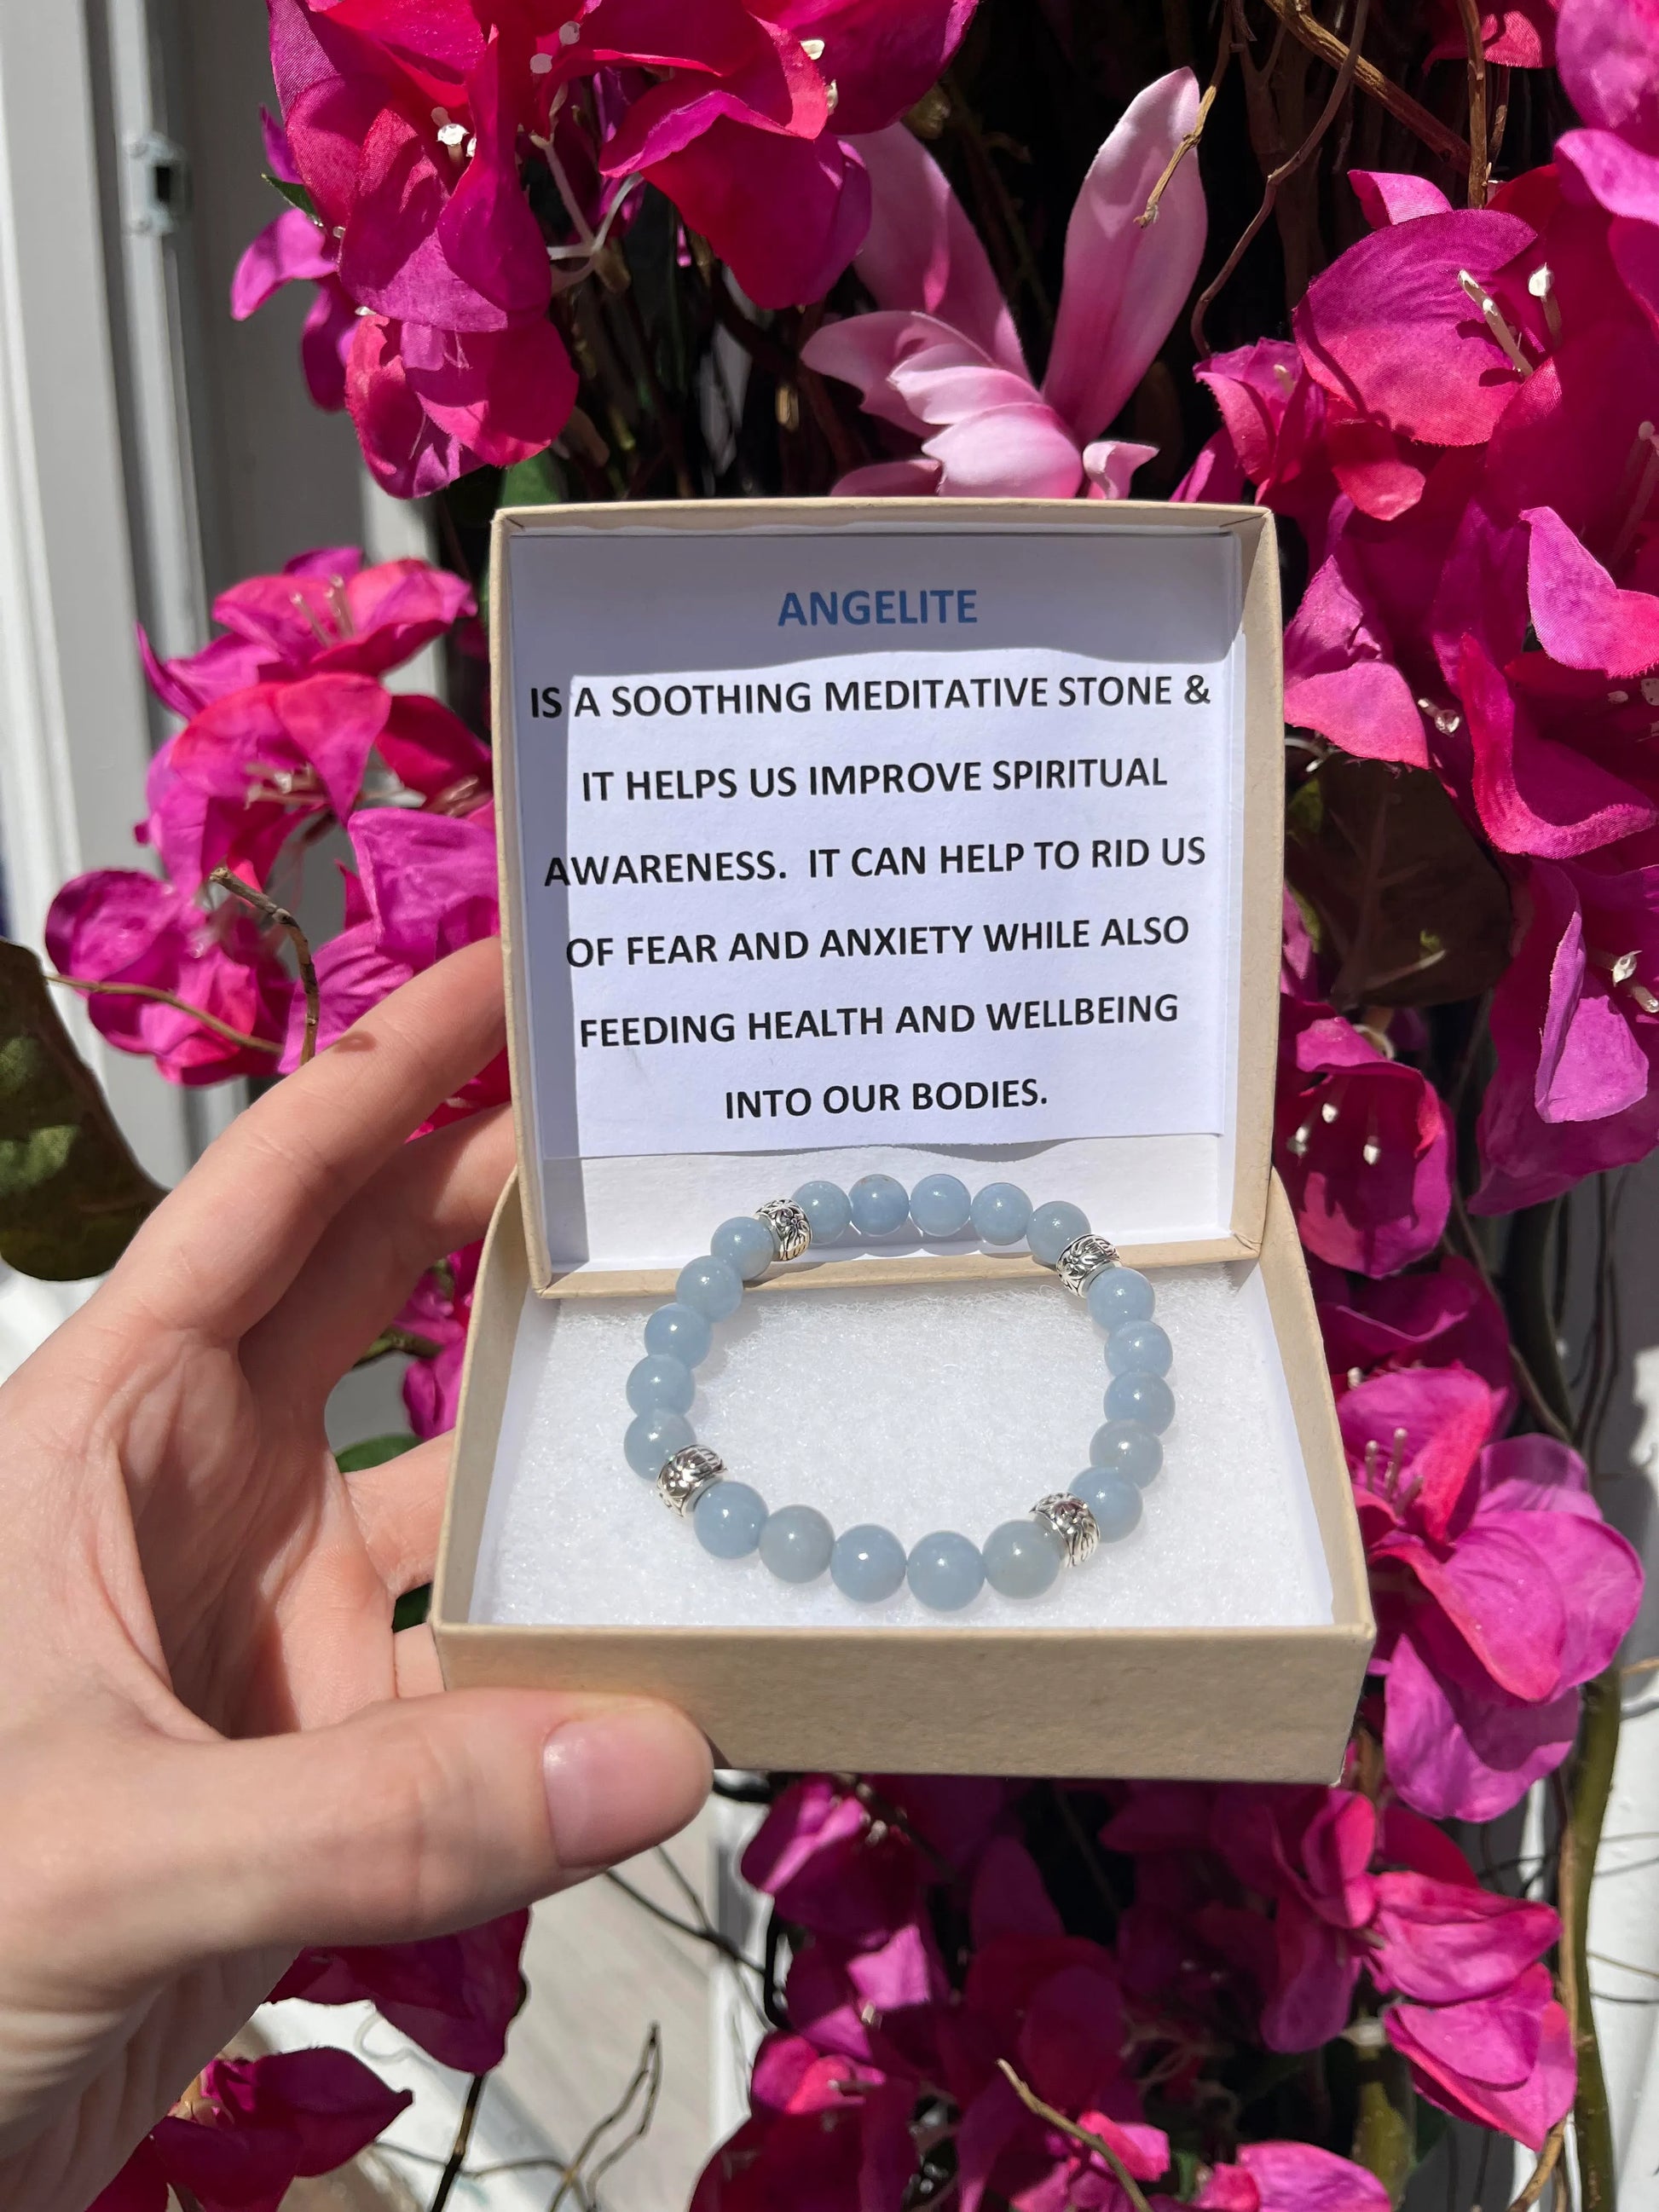 A crystal bracelet in a brown box with a typed description in the lid that reads: Angelite is a soothing meditative stone & helps us improve spiritual awareness. It can help to rid of us fear and anxiety while also feeding health and wellbeing into our bodies.